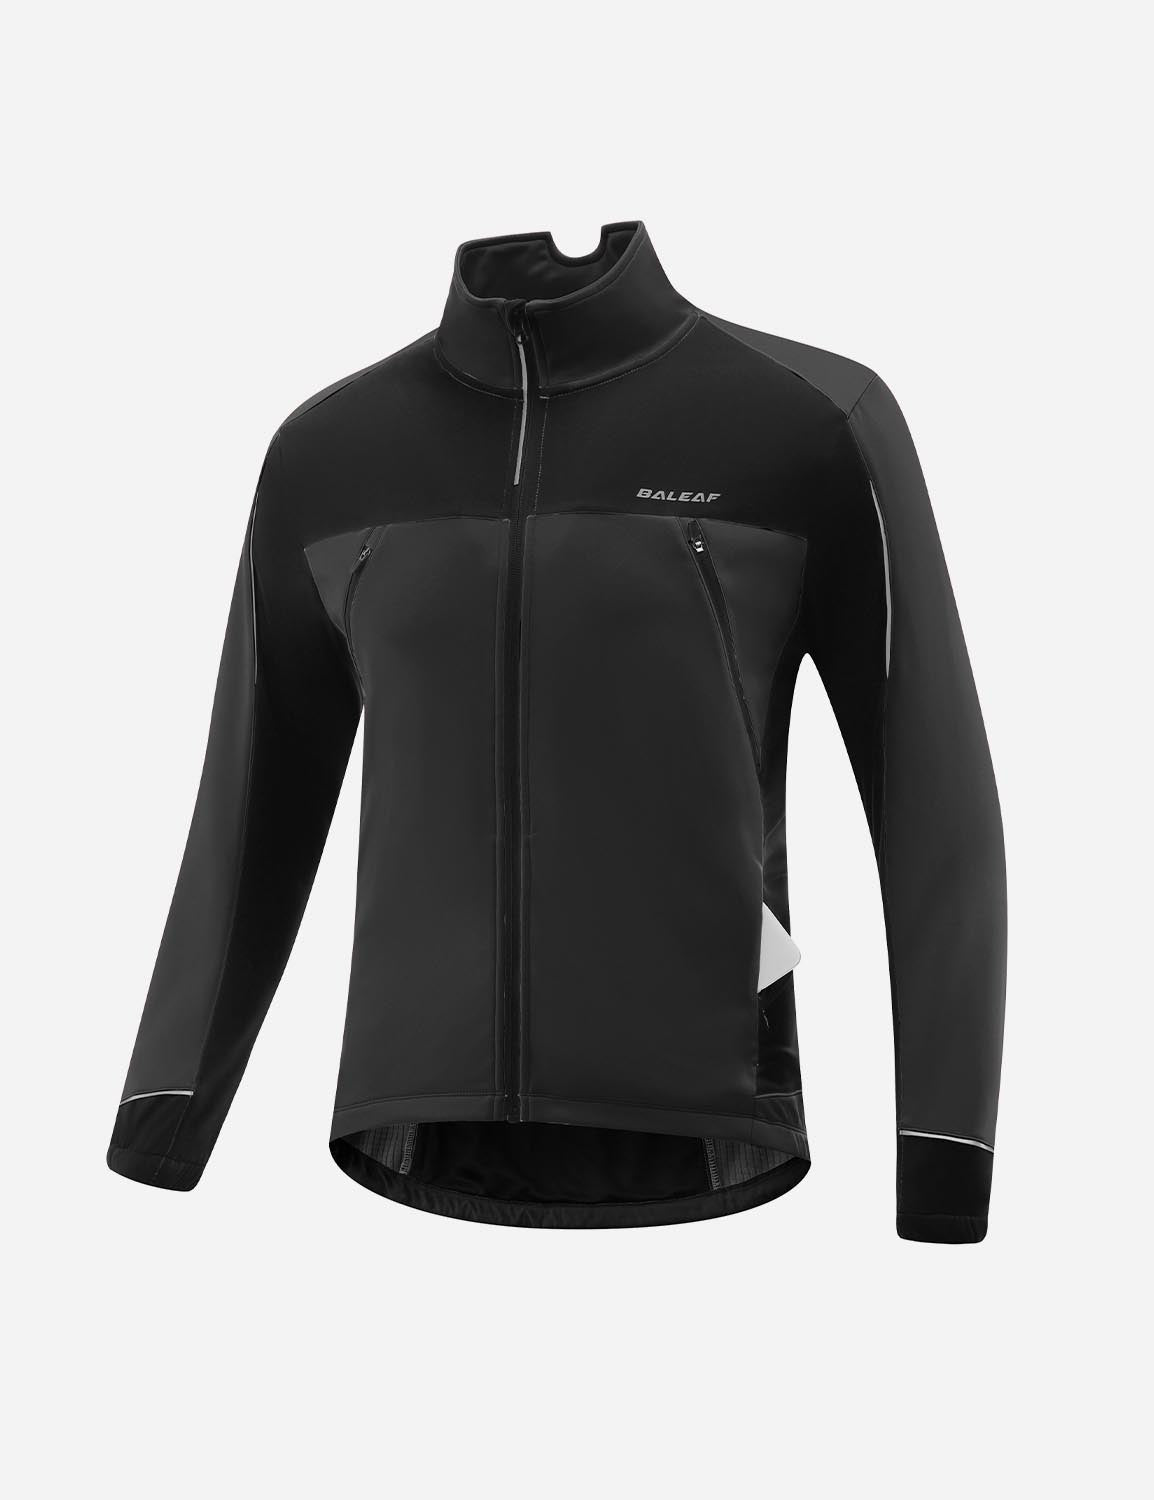 Baleaf Men's Windproof Thermal Softshell Cycling Jacket cai044 Anthracite Front